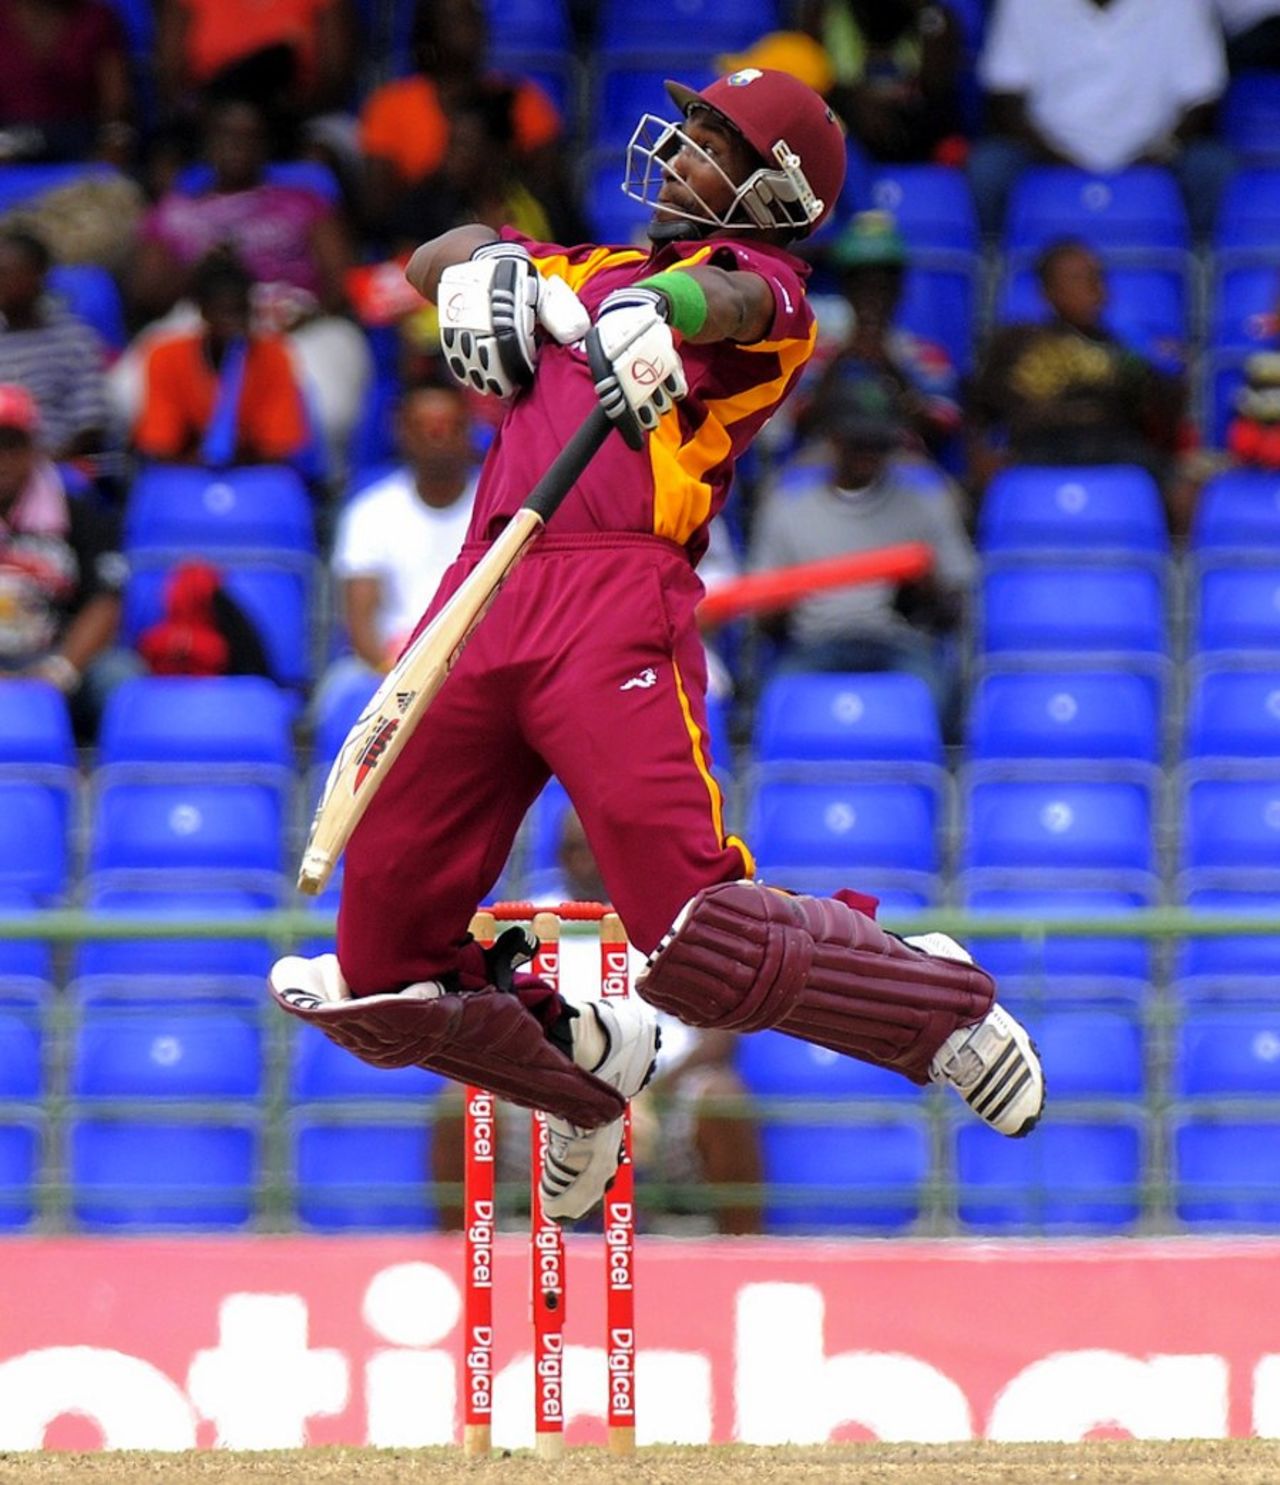 Dwayne Bravo jumps to avoid a short ball, West Indies v New Zealand, 4th ODI, Basseterre, July 14, 2012